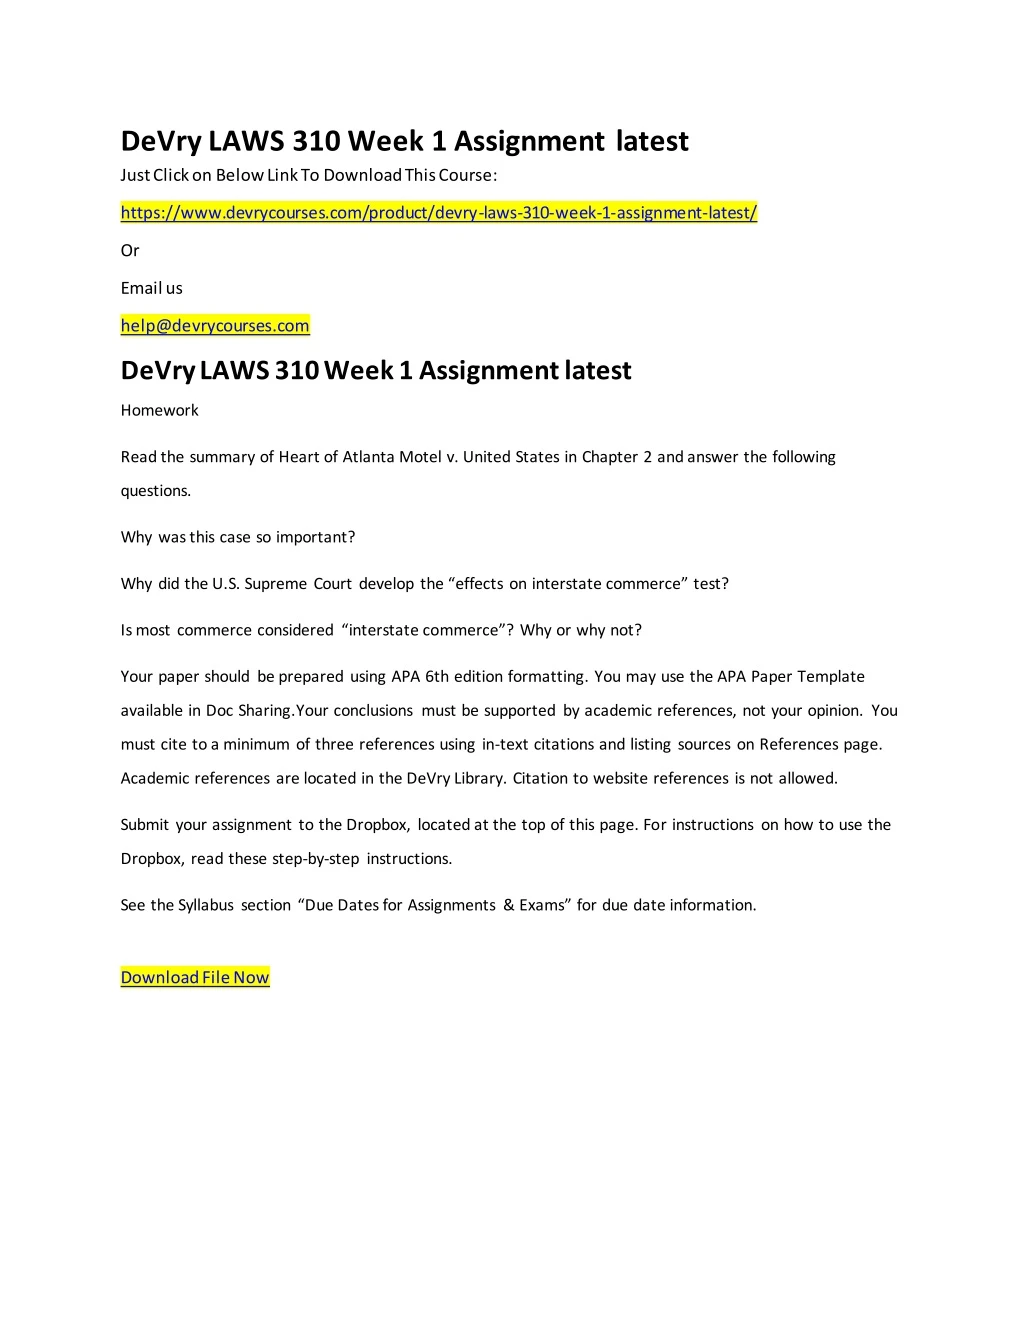 devry laws 310 week 1 assignment latest just